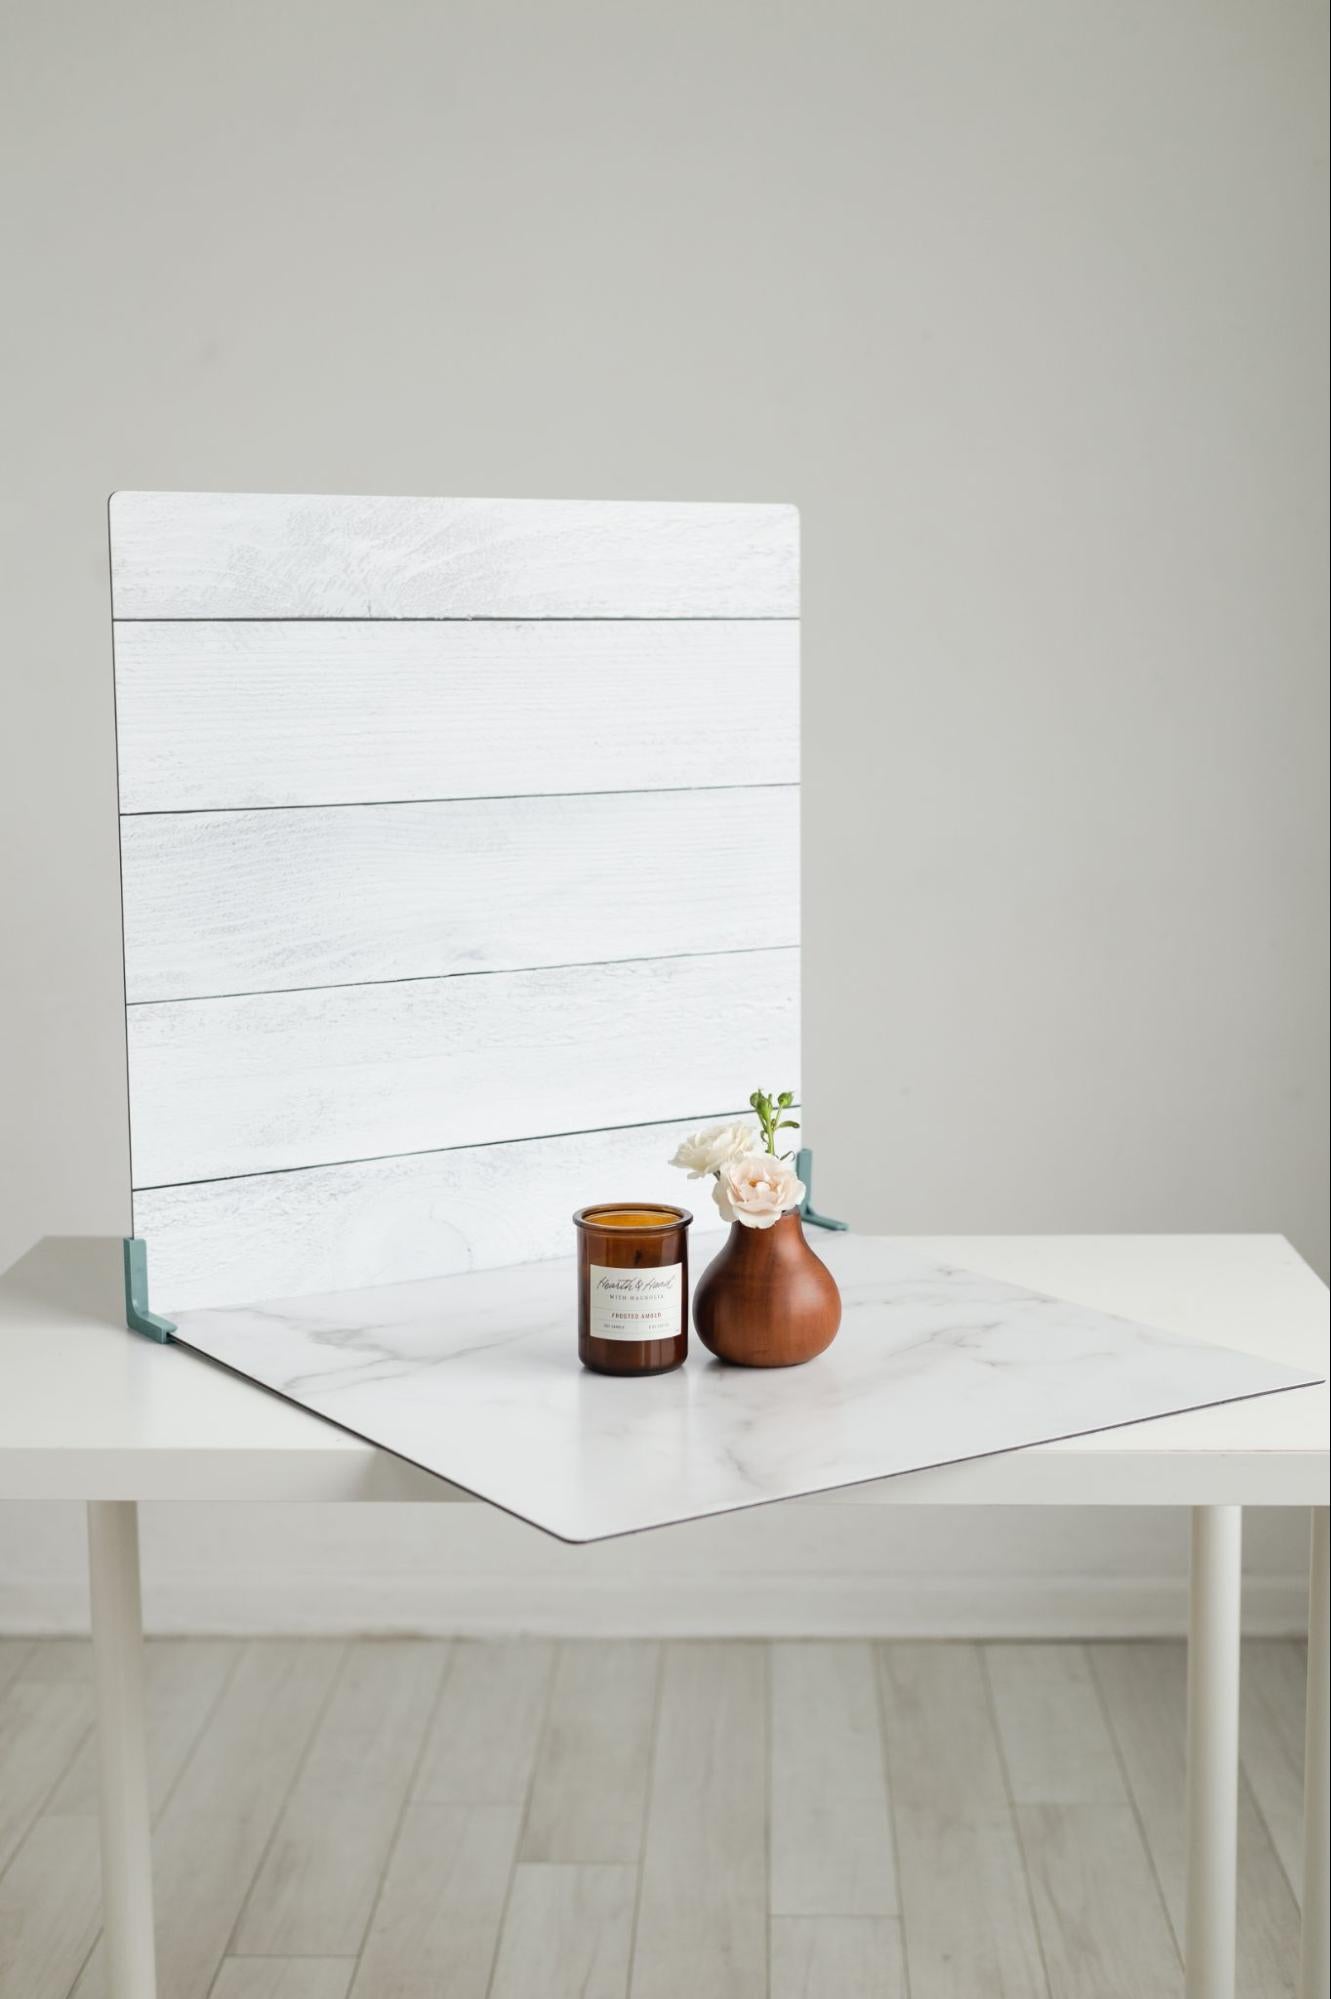 backdrop and table creating a L-effect for ecommerce photo